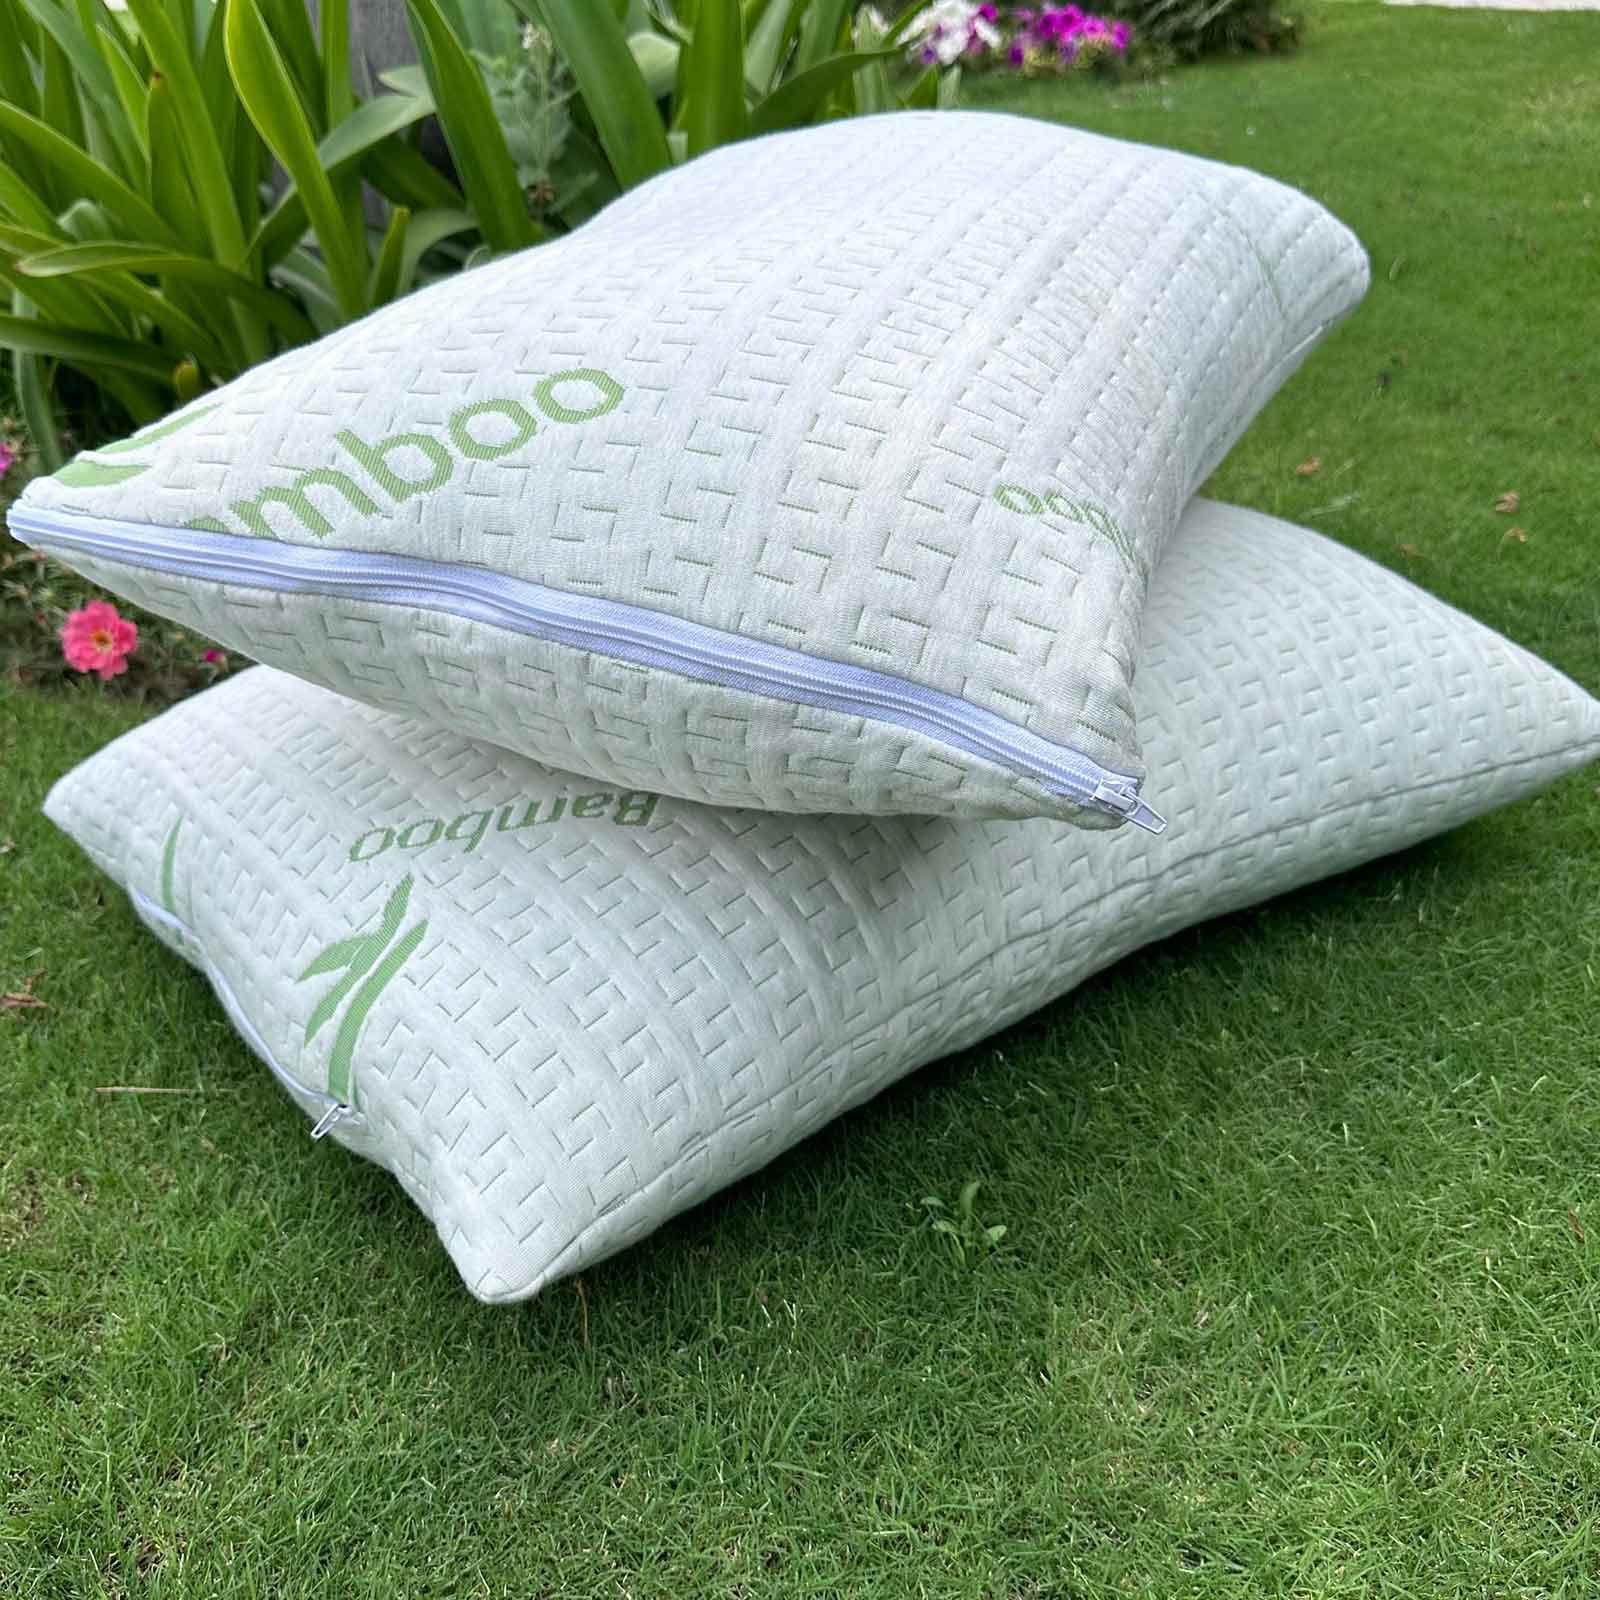 Miracle bamboo cushion. New in box! - Household Items - Northport, Alabama, Facebook Marketplace